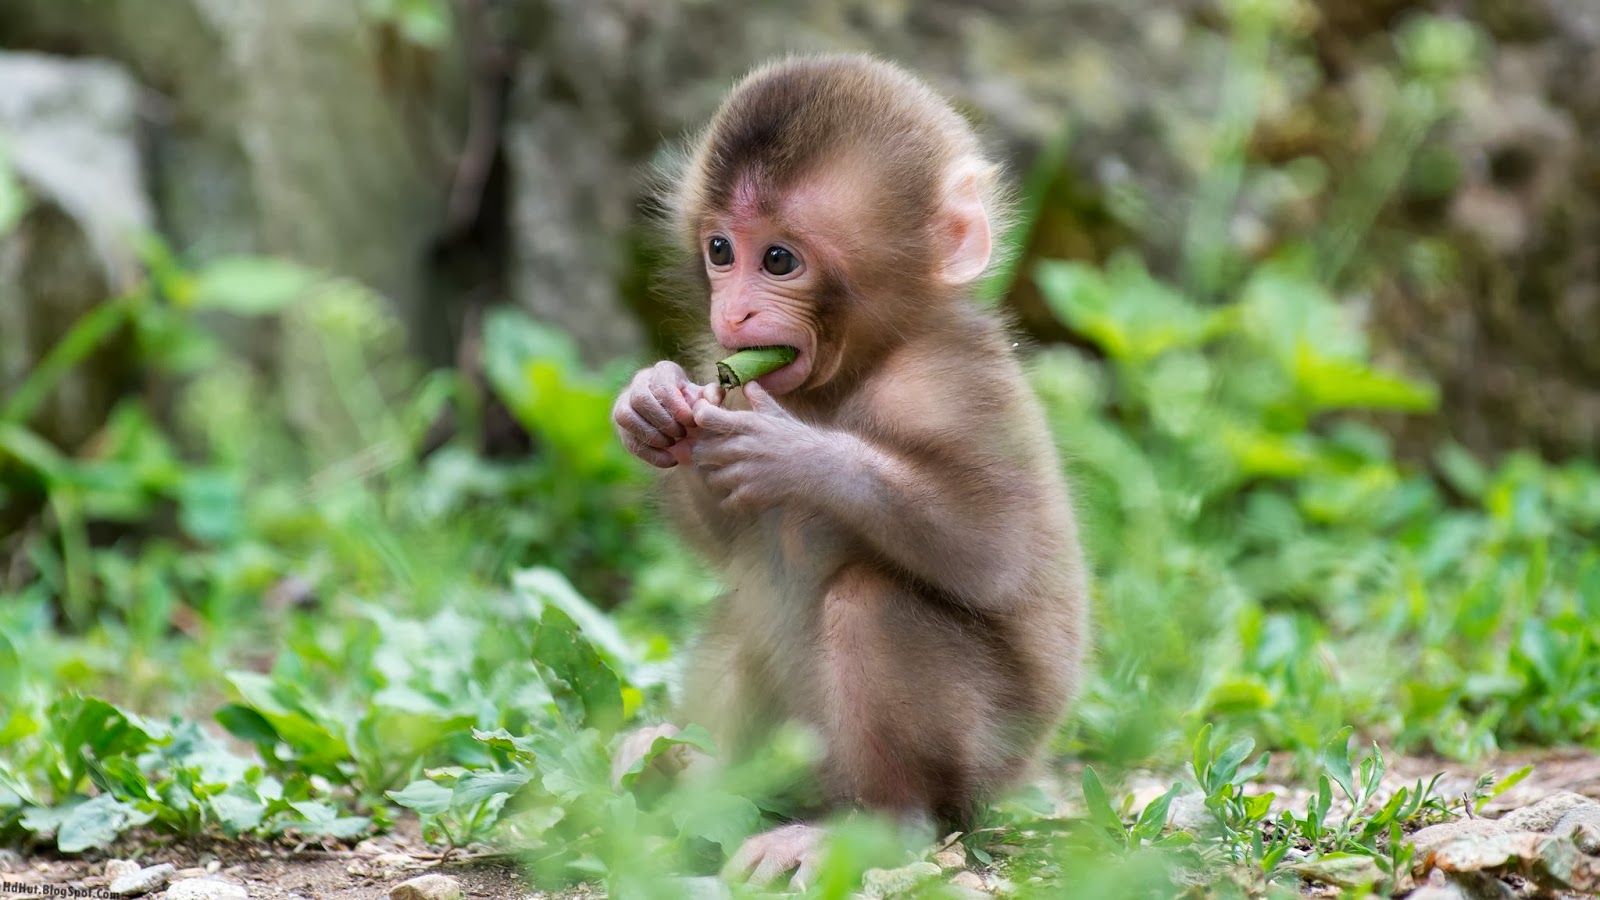 cute monkey wallpapers in hd funny monkey wallpapers funny and